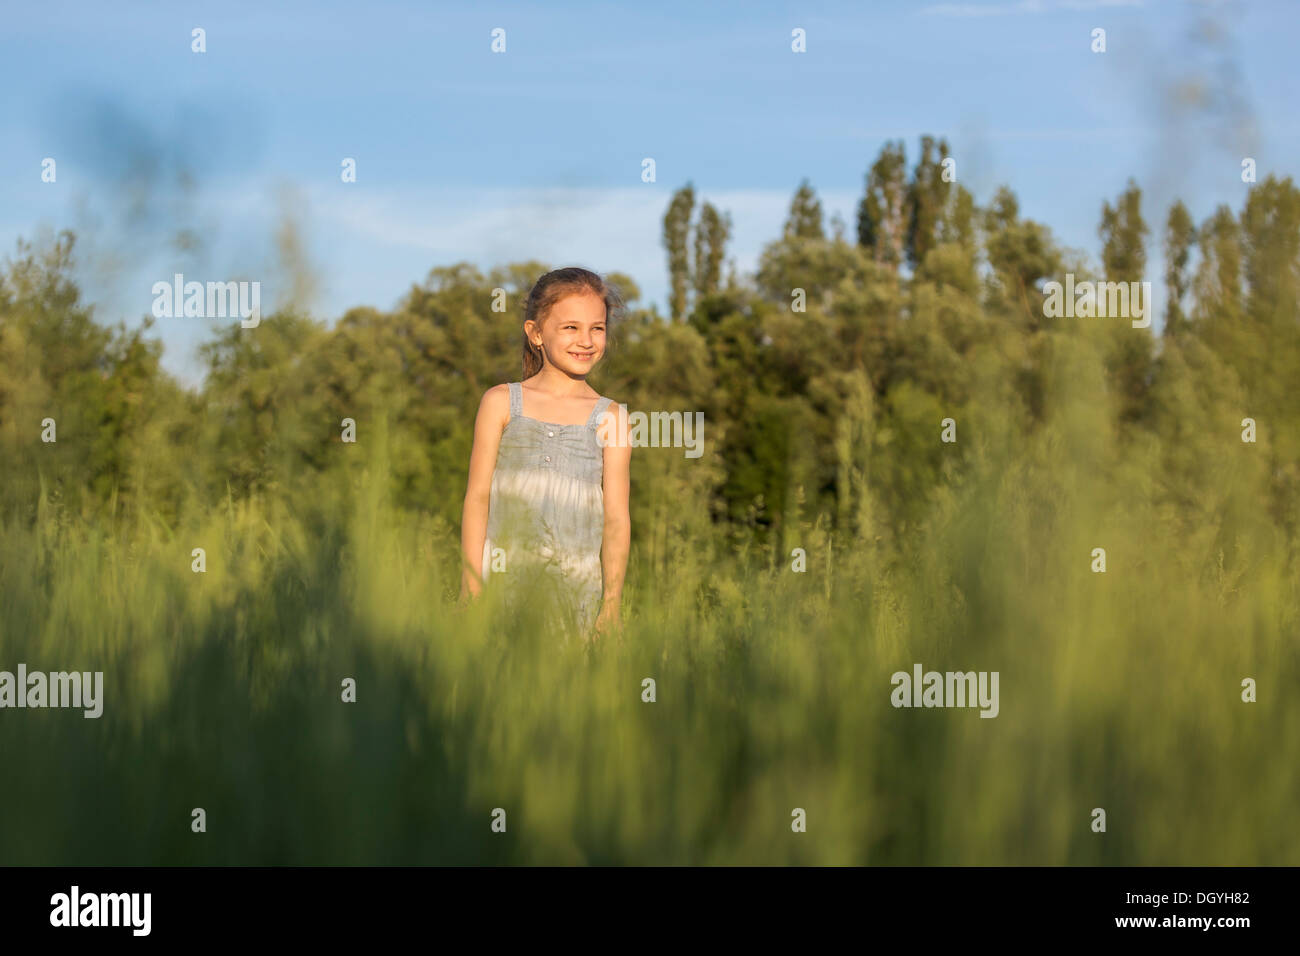 A young cheerful girl standing in a field looking at the view Stock Photo